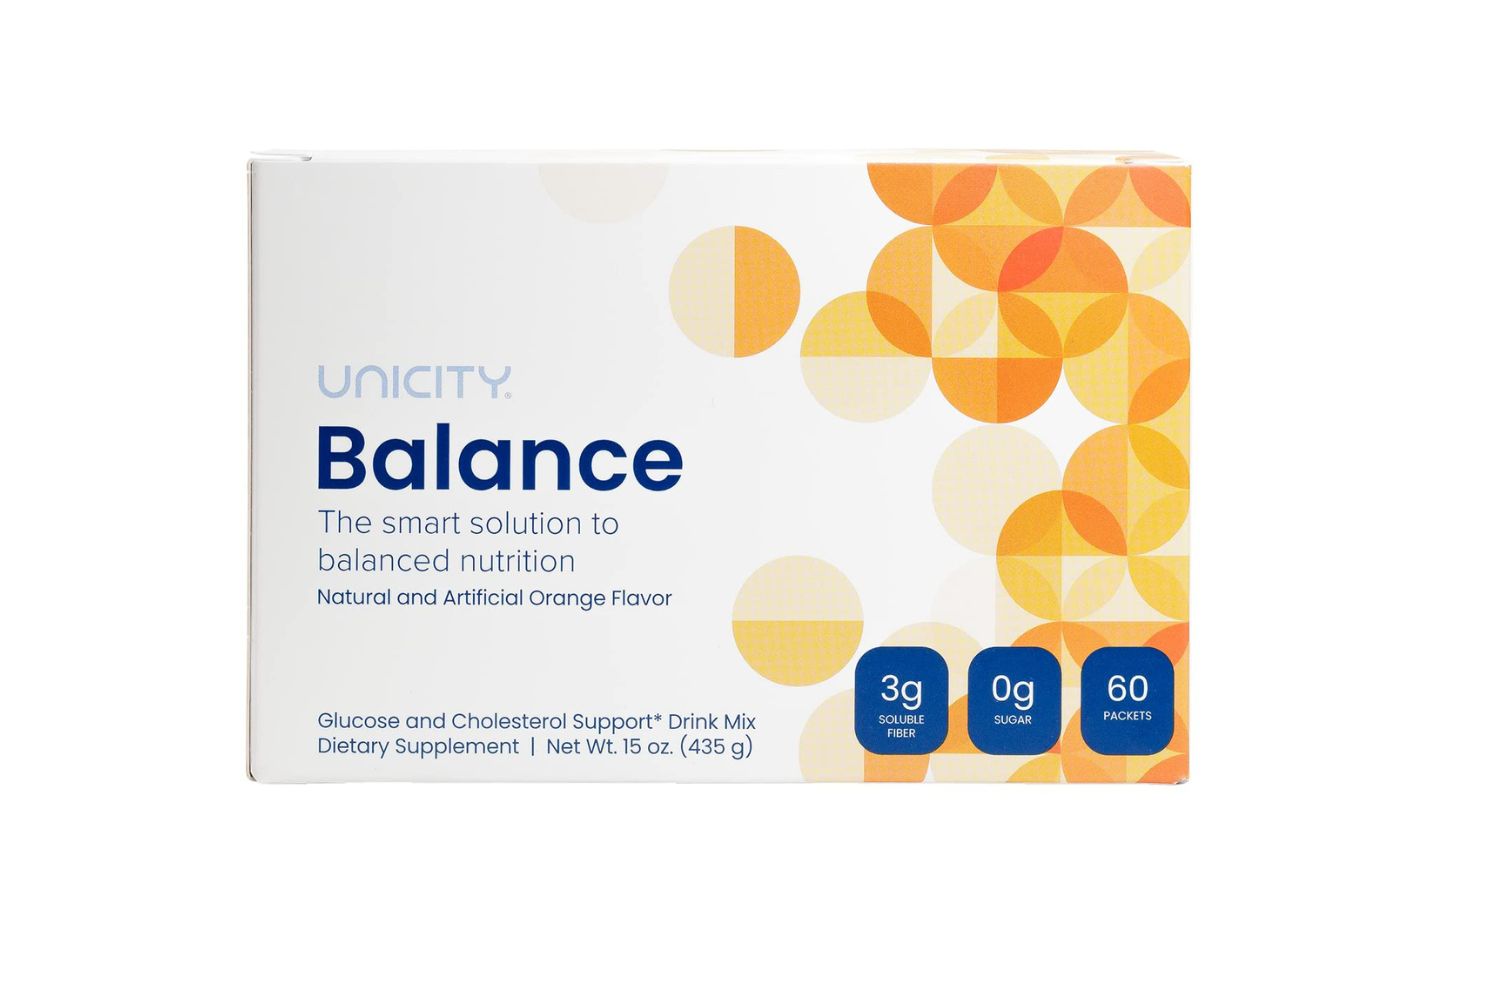 17-intriguing-facts-about-unicity-balance